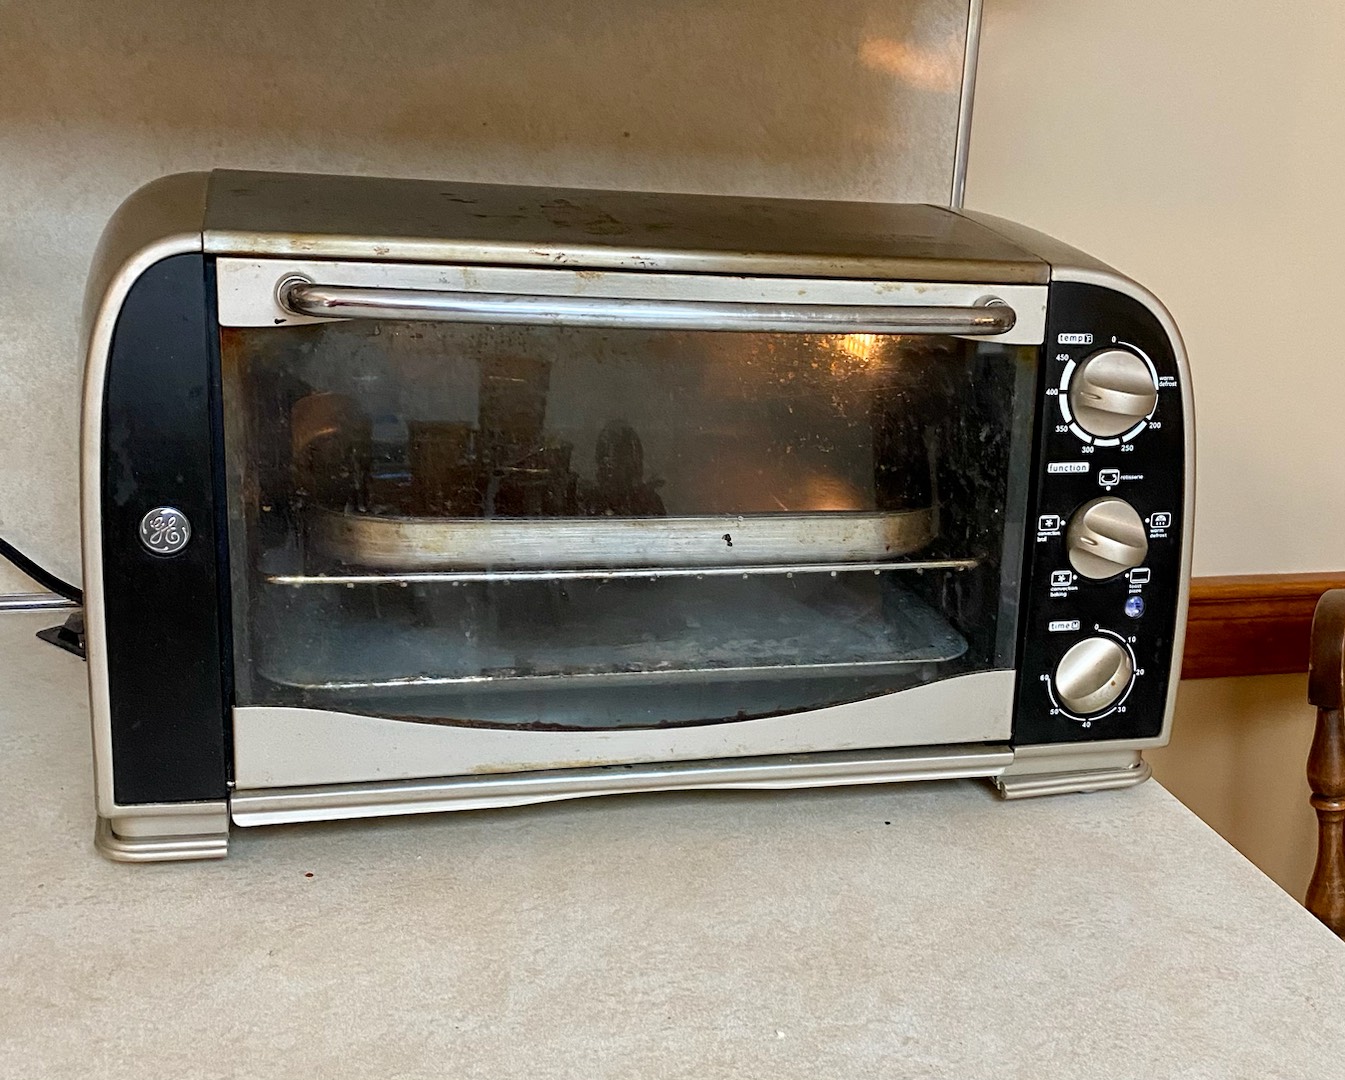 GE-Toaster-Oven